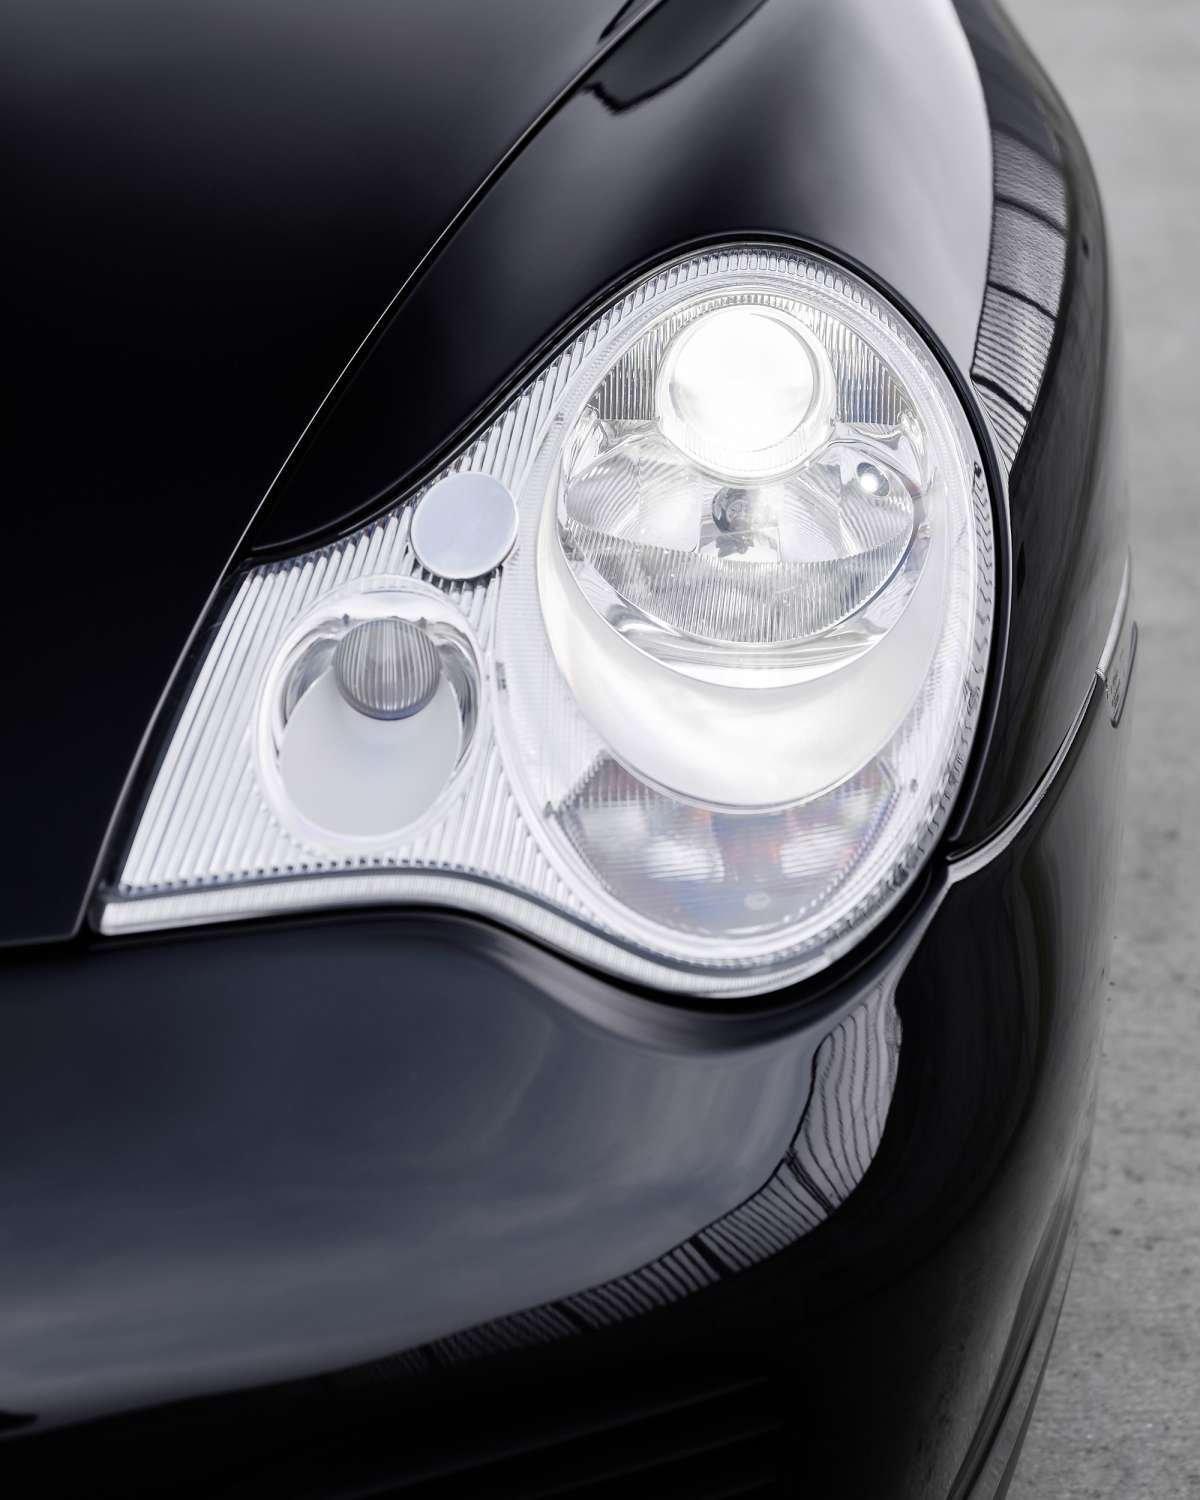 The Porsche 996 Carrera 3.6/4S headlamps are a good reference for checking panel gaps - Porsche 996 Carrera 3.6/4S Buyer's Guide 